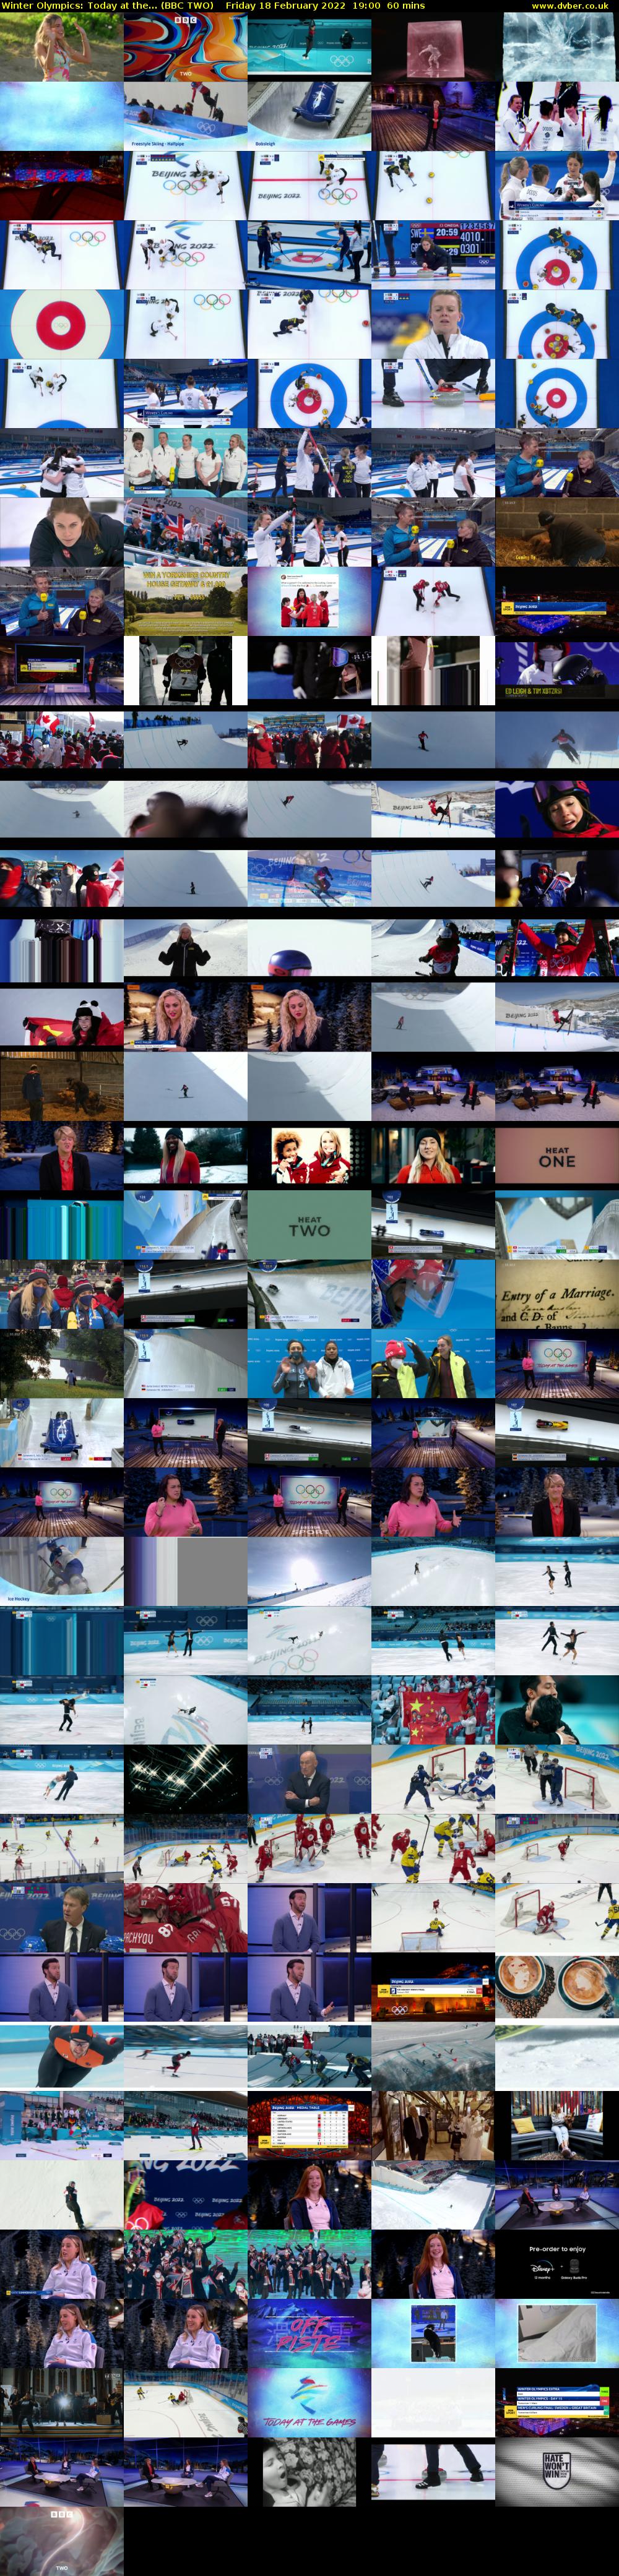 Winter Olympics: Today at the... (BBC TWO) Friday 18 February 2022 19:00 - 20:00